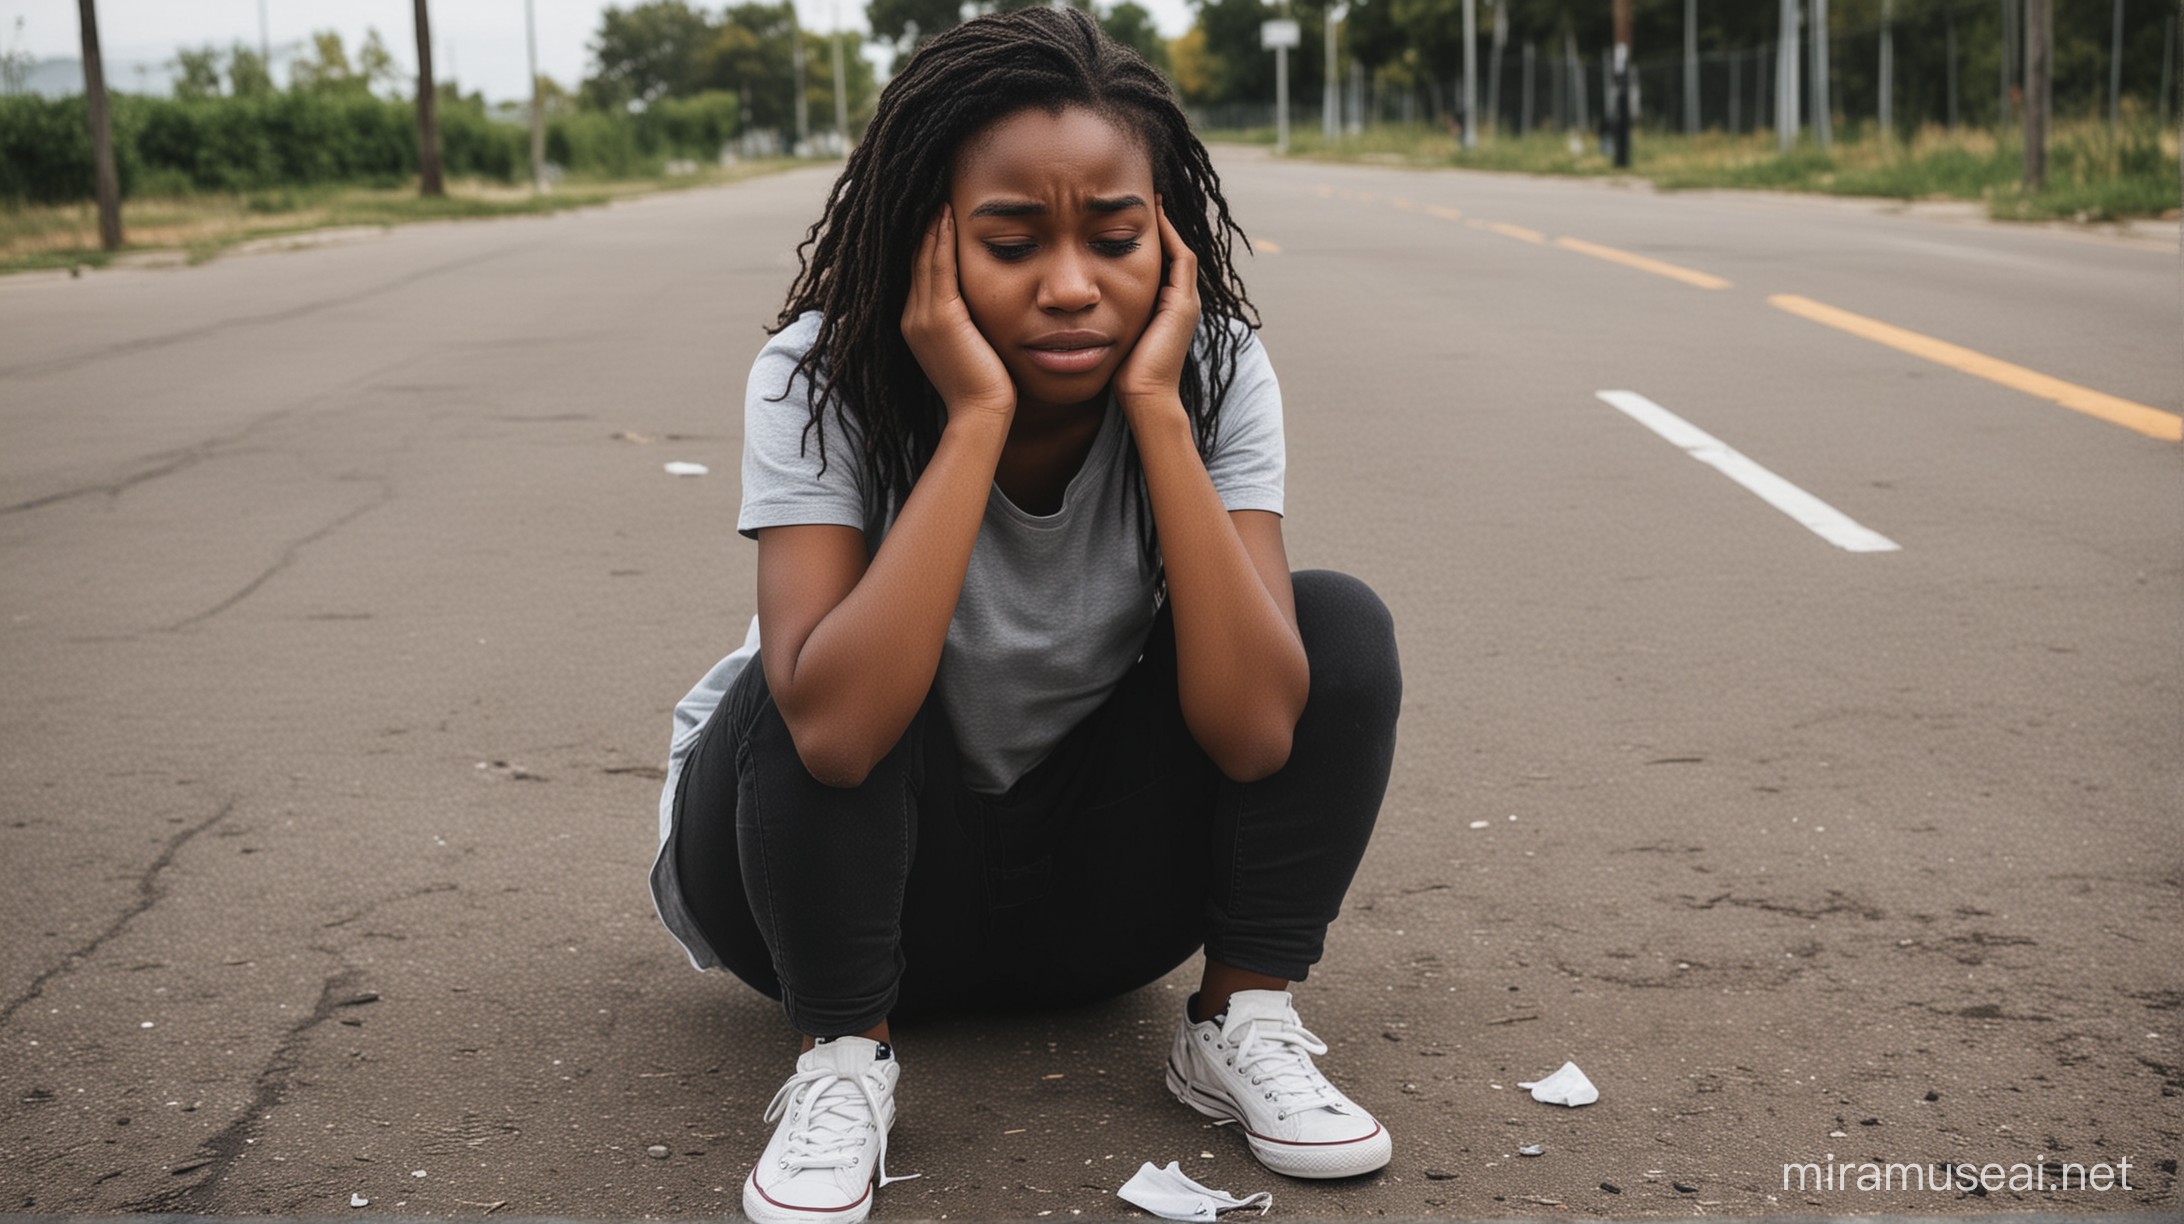 Black Teen Girl Sitting on Ground Expressing Sadness and Tears